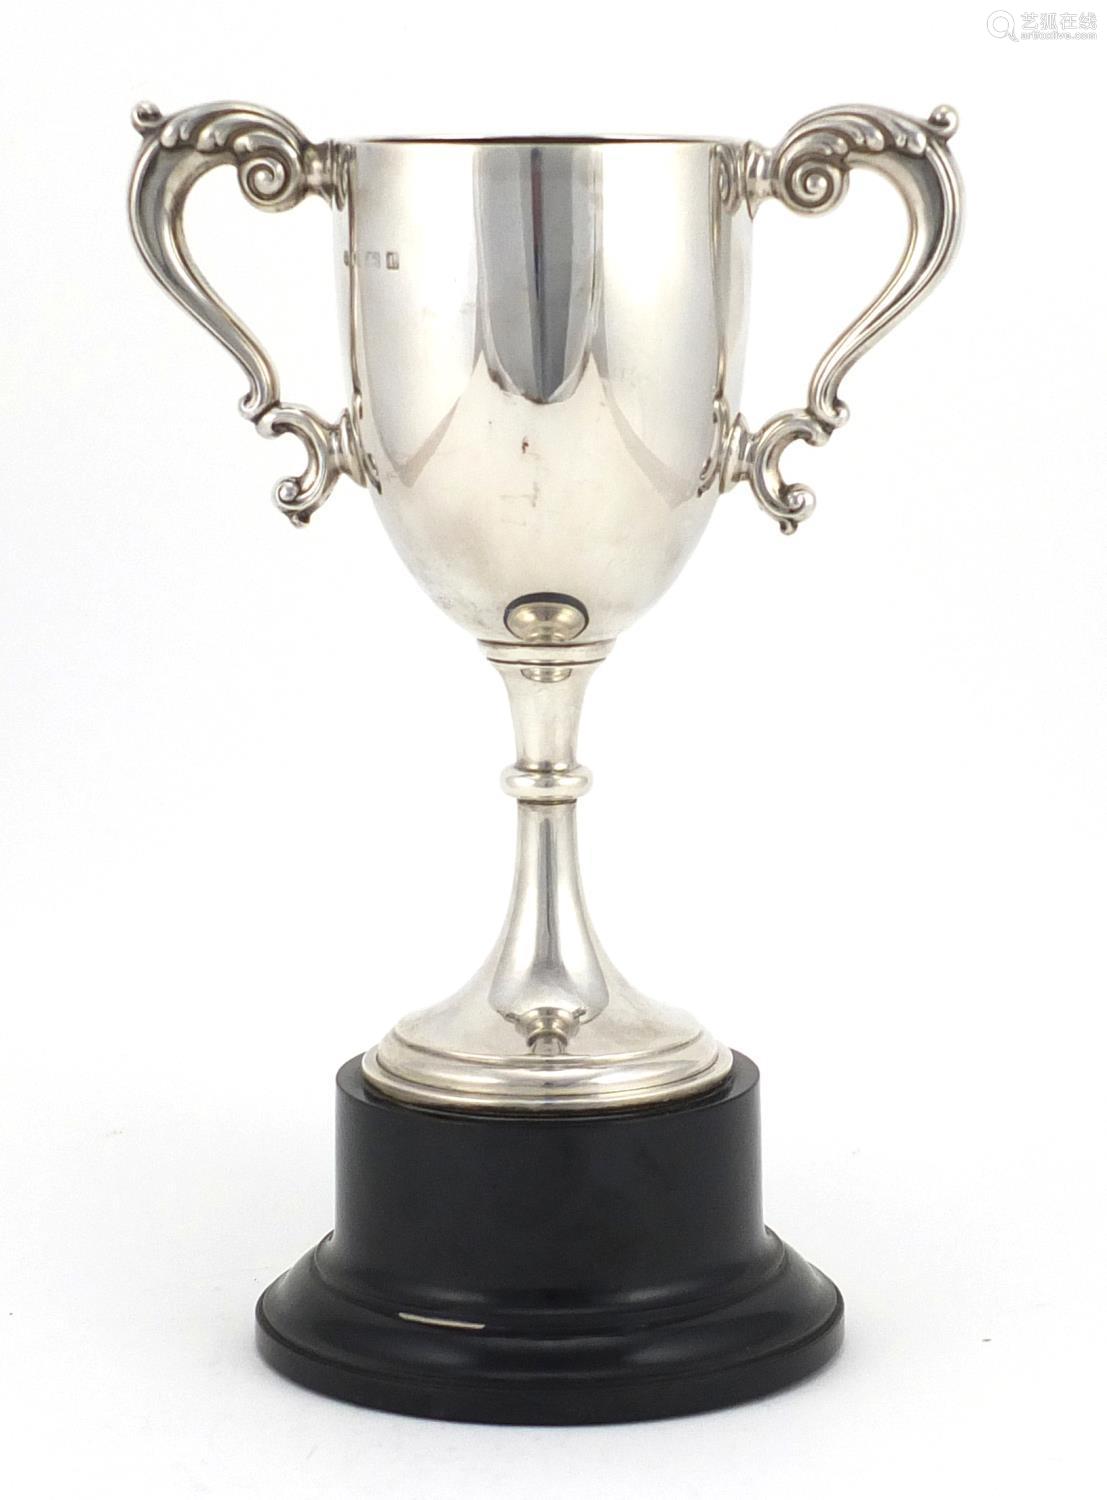 silver twin handled trophy on stand, by william neale & son ltd